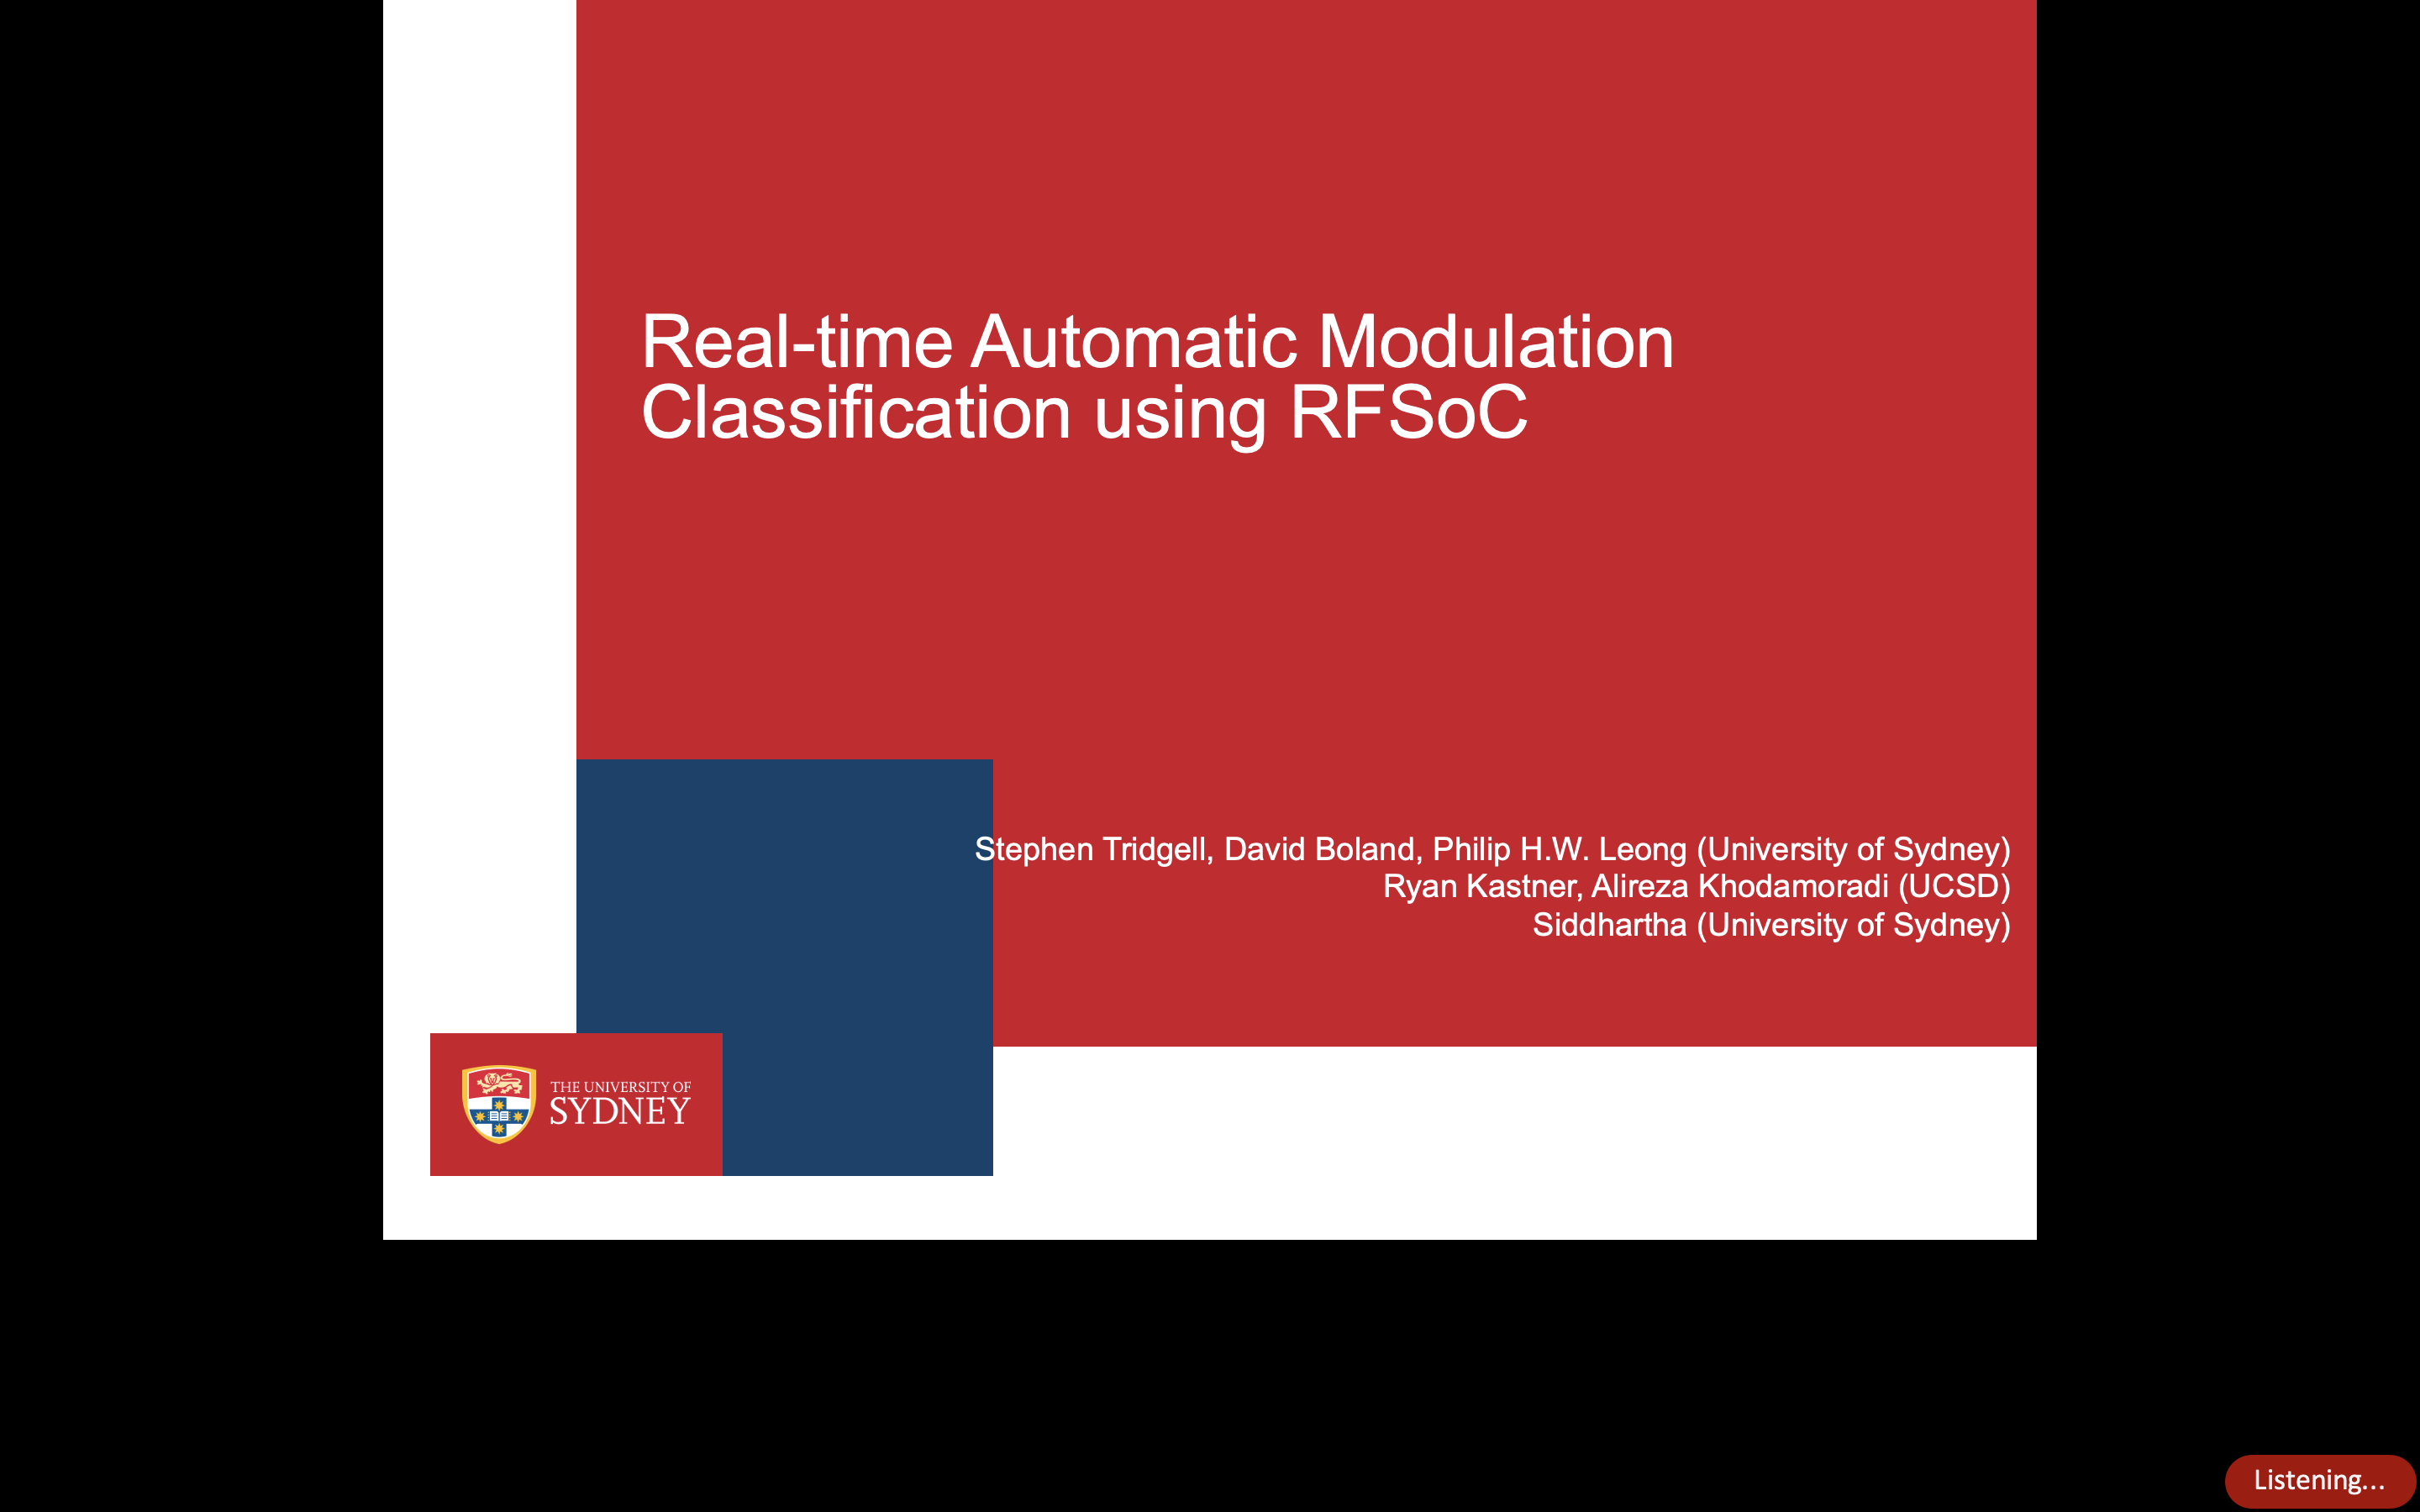 Real-time automatic modulation classification using RFSoC